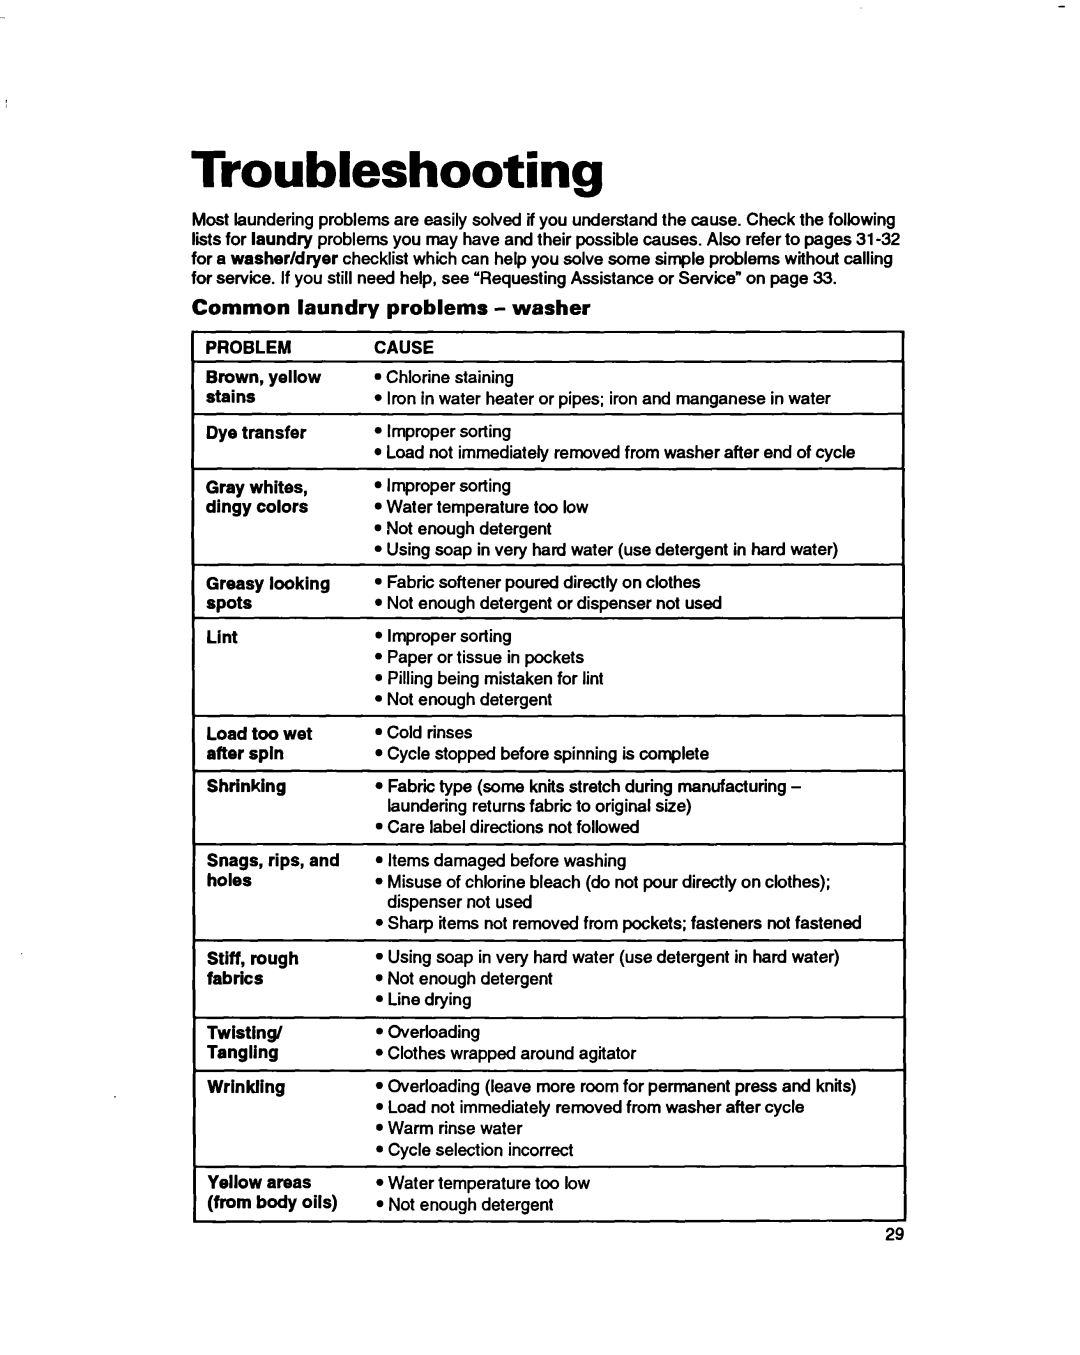 Whirlpool 3396314 Troubleshooting, Common laundry, problems - washer, PROBLEM Brown, yellow stains Dye transfer, Cause 